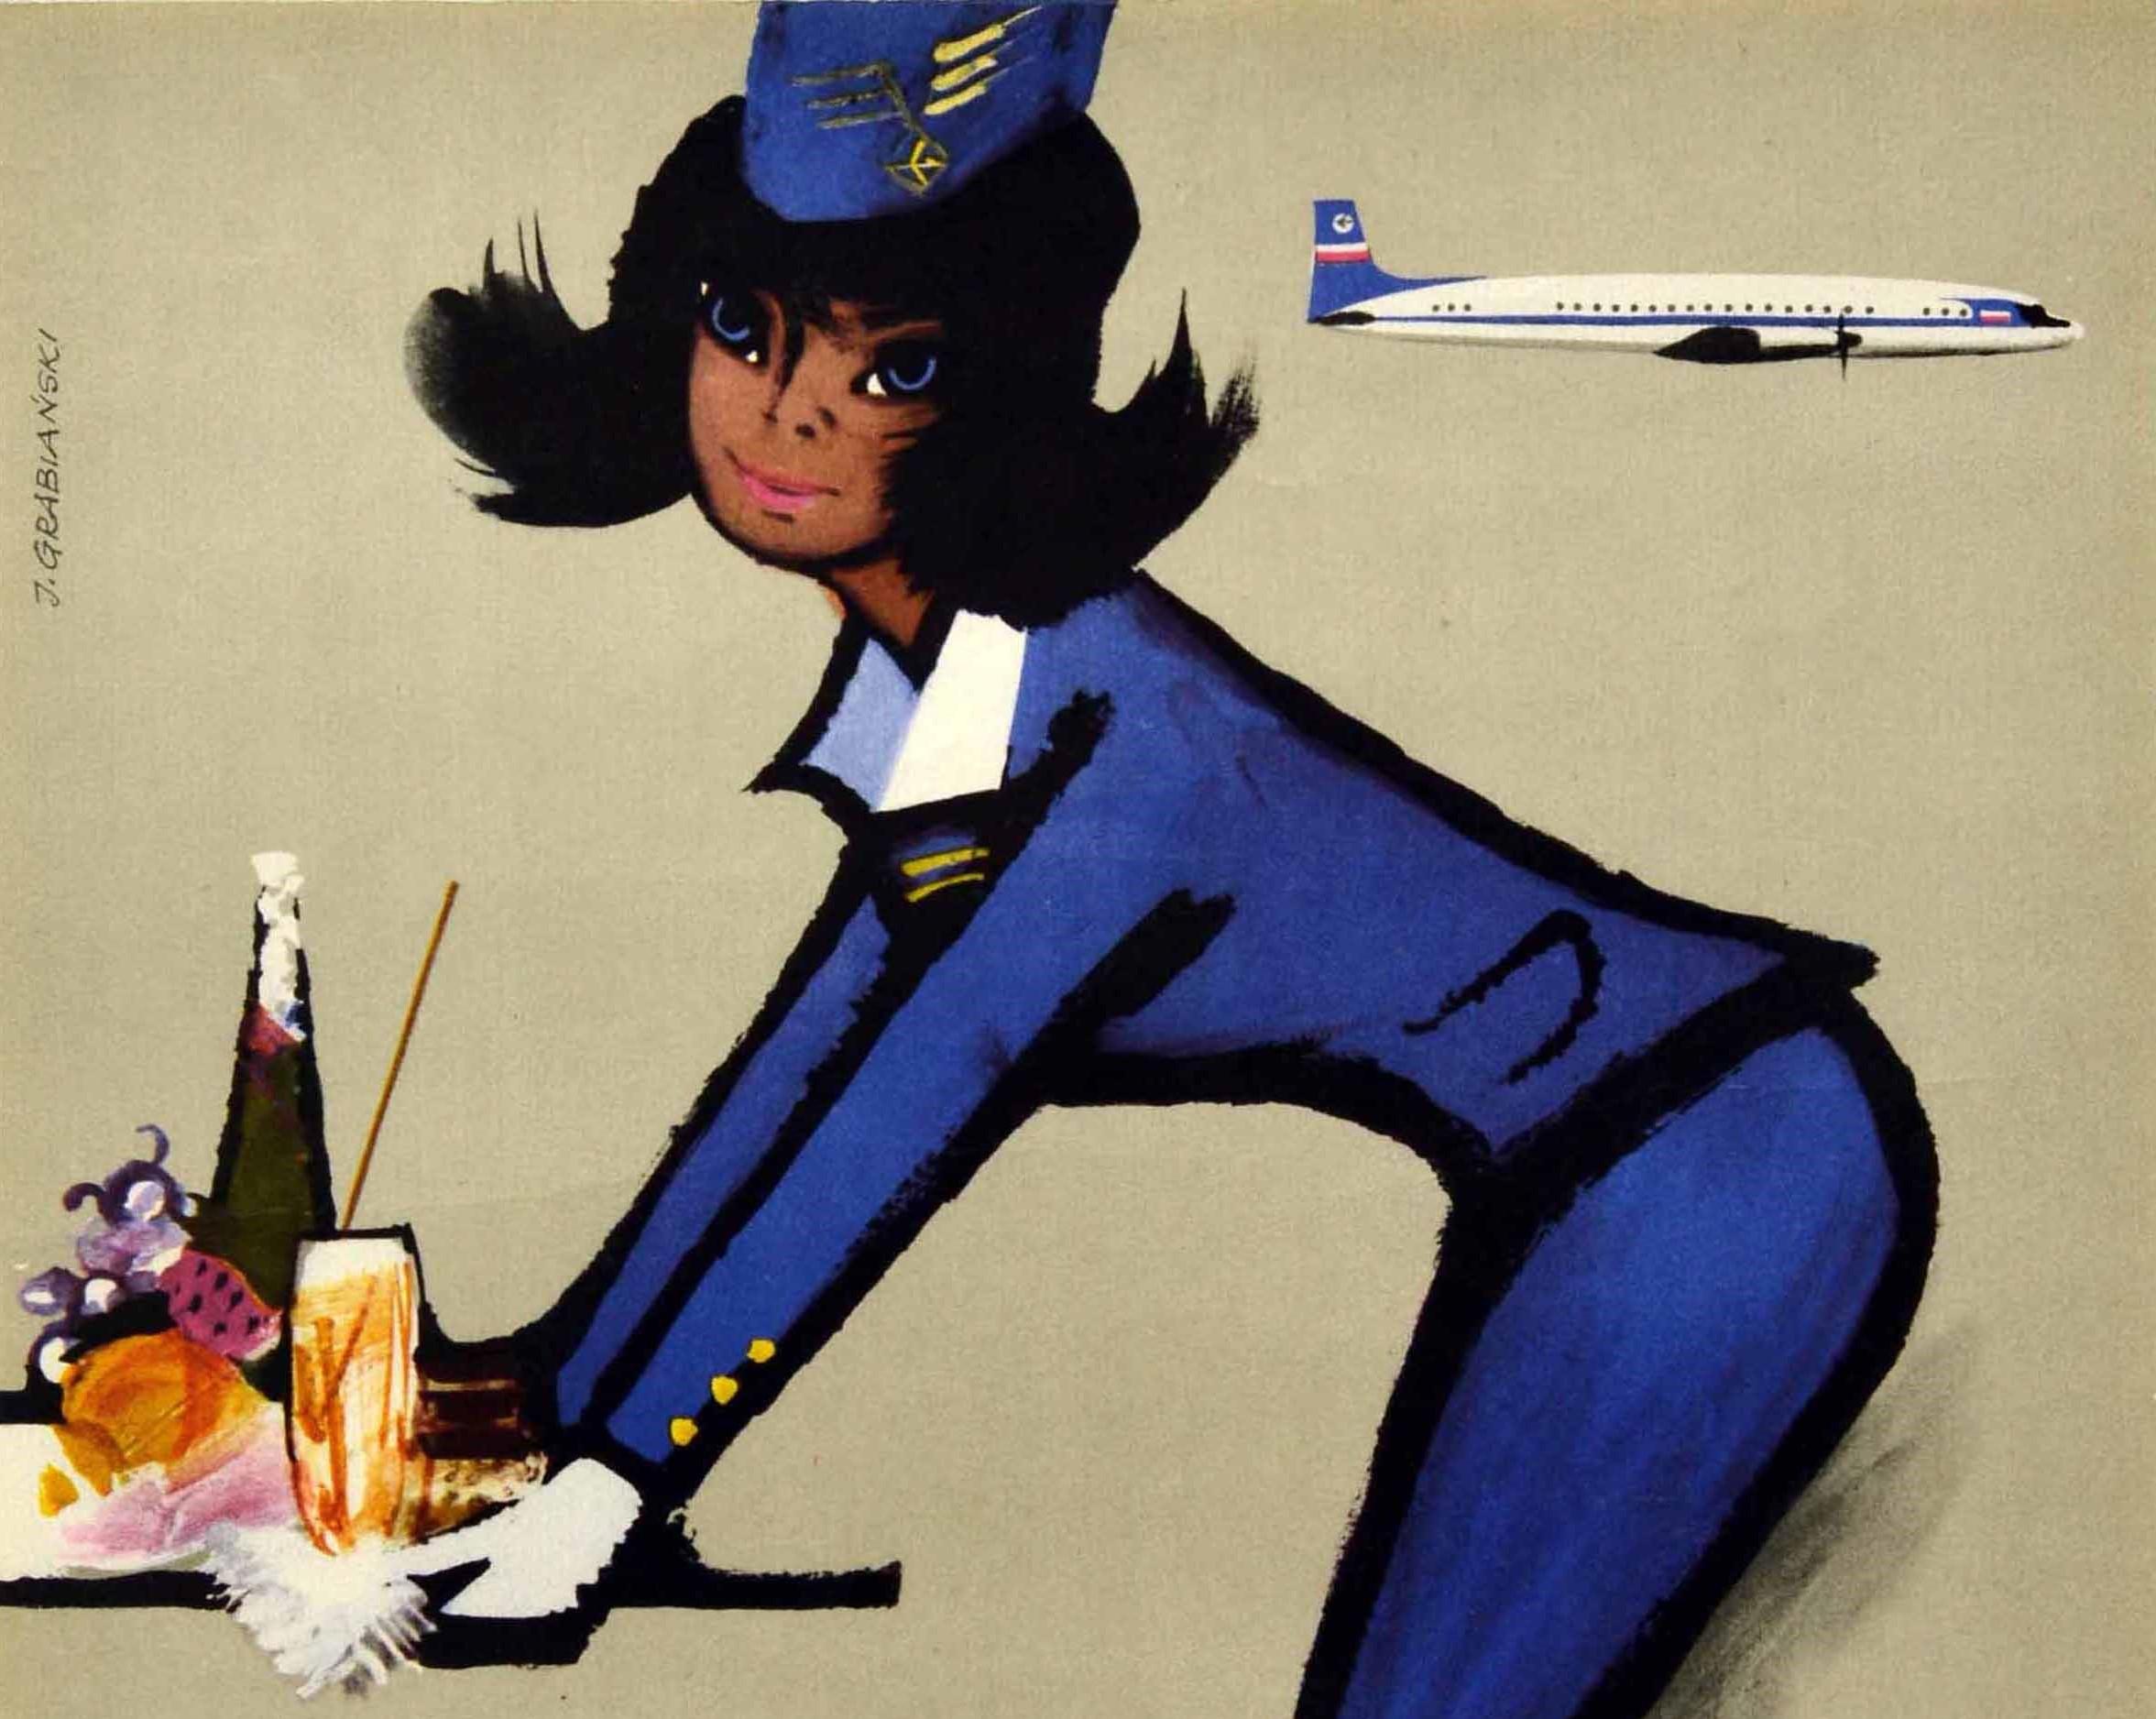 Original vintage advertising poster for LOT Polish Airlines (Polskie Linie Lotnicze; founded 1929) featuring a stylised image of an airline hostess in a blue stewardess uniform and cap with a LOT crane bird logo on it and white gloves, looking